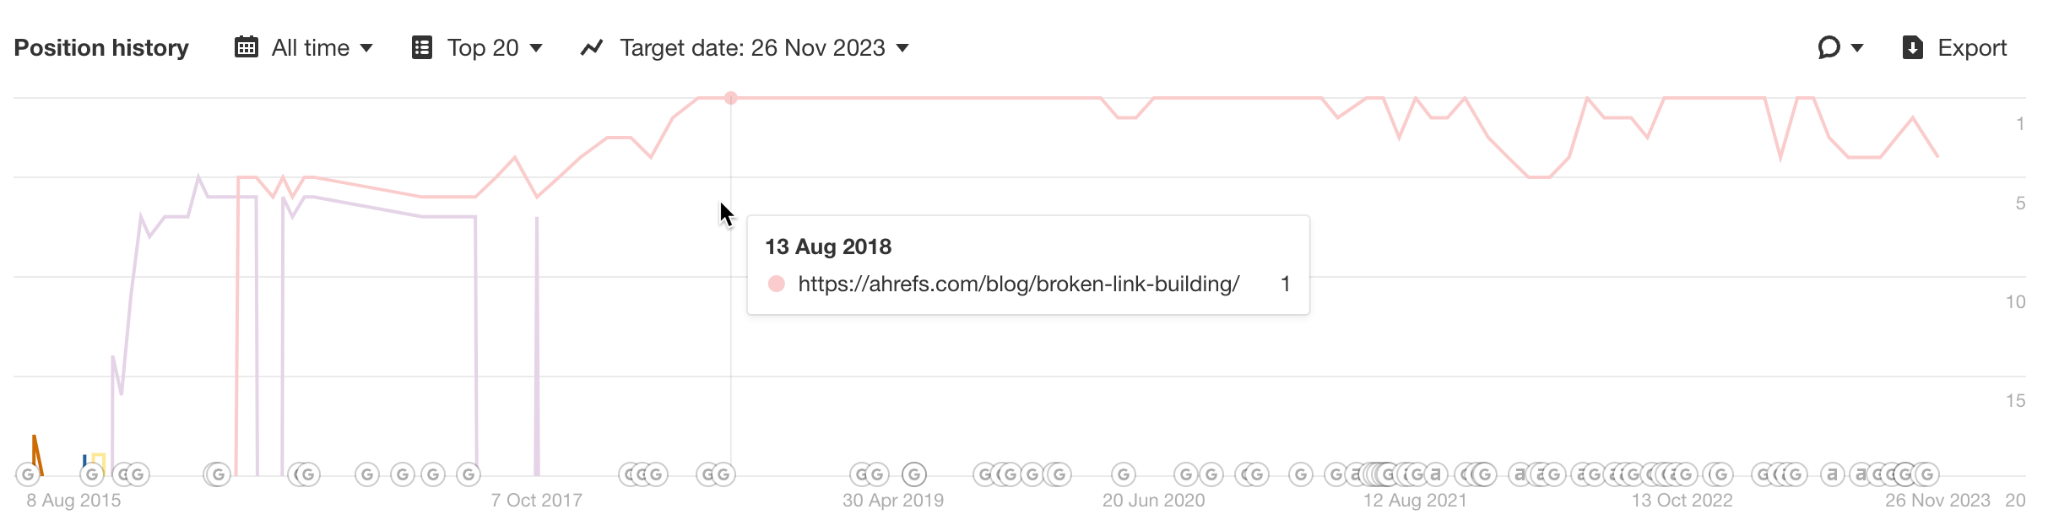 Position history for "broken link building" - after consolidating. 